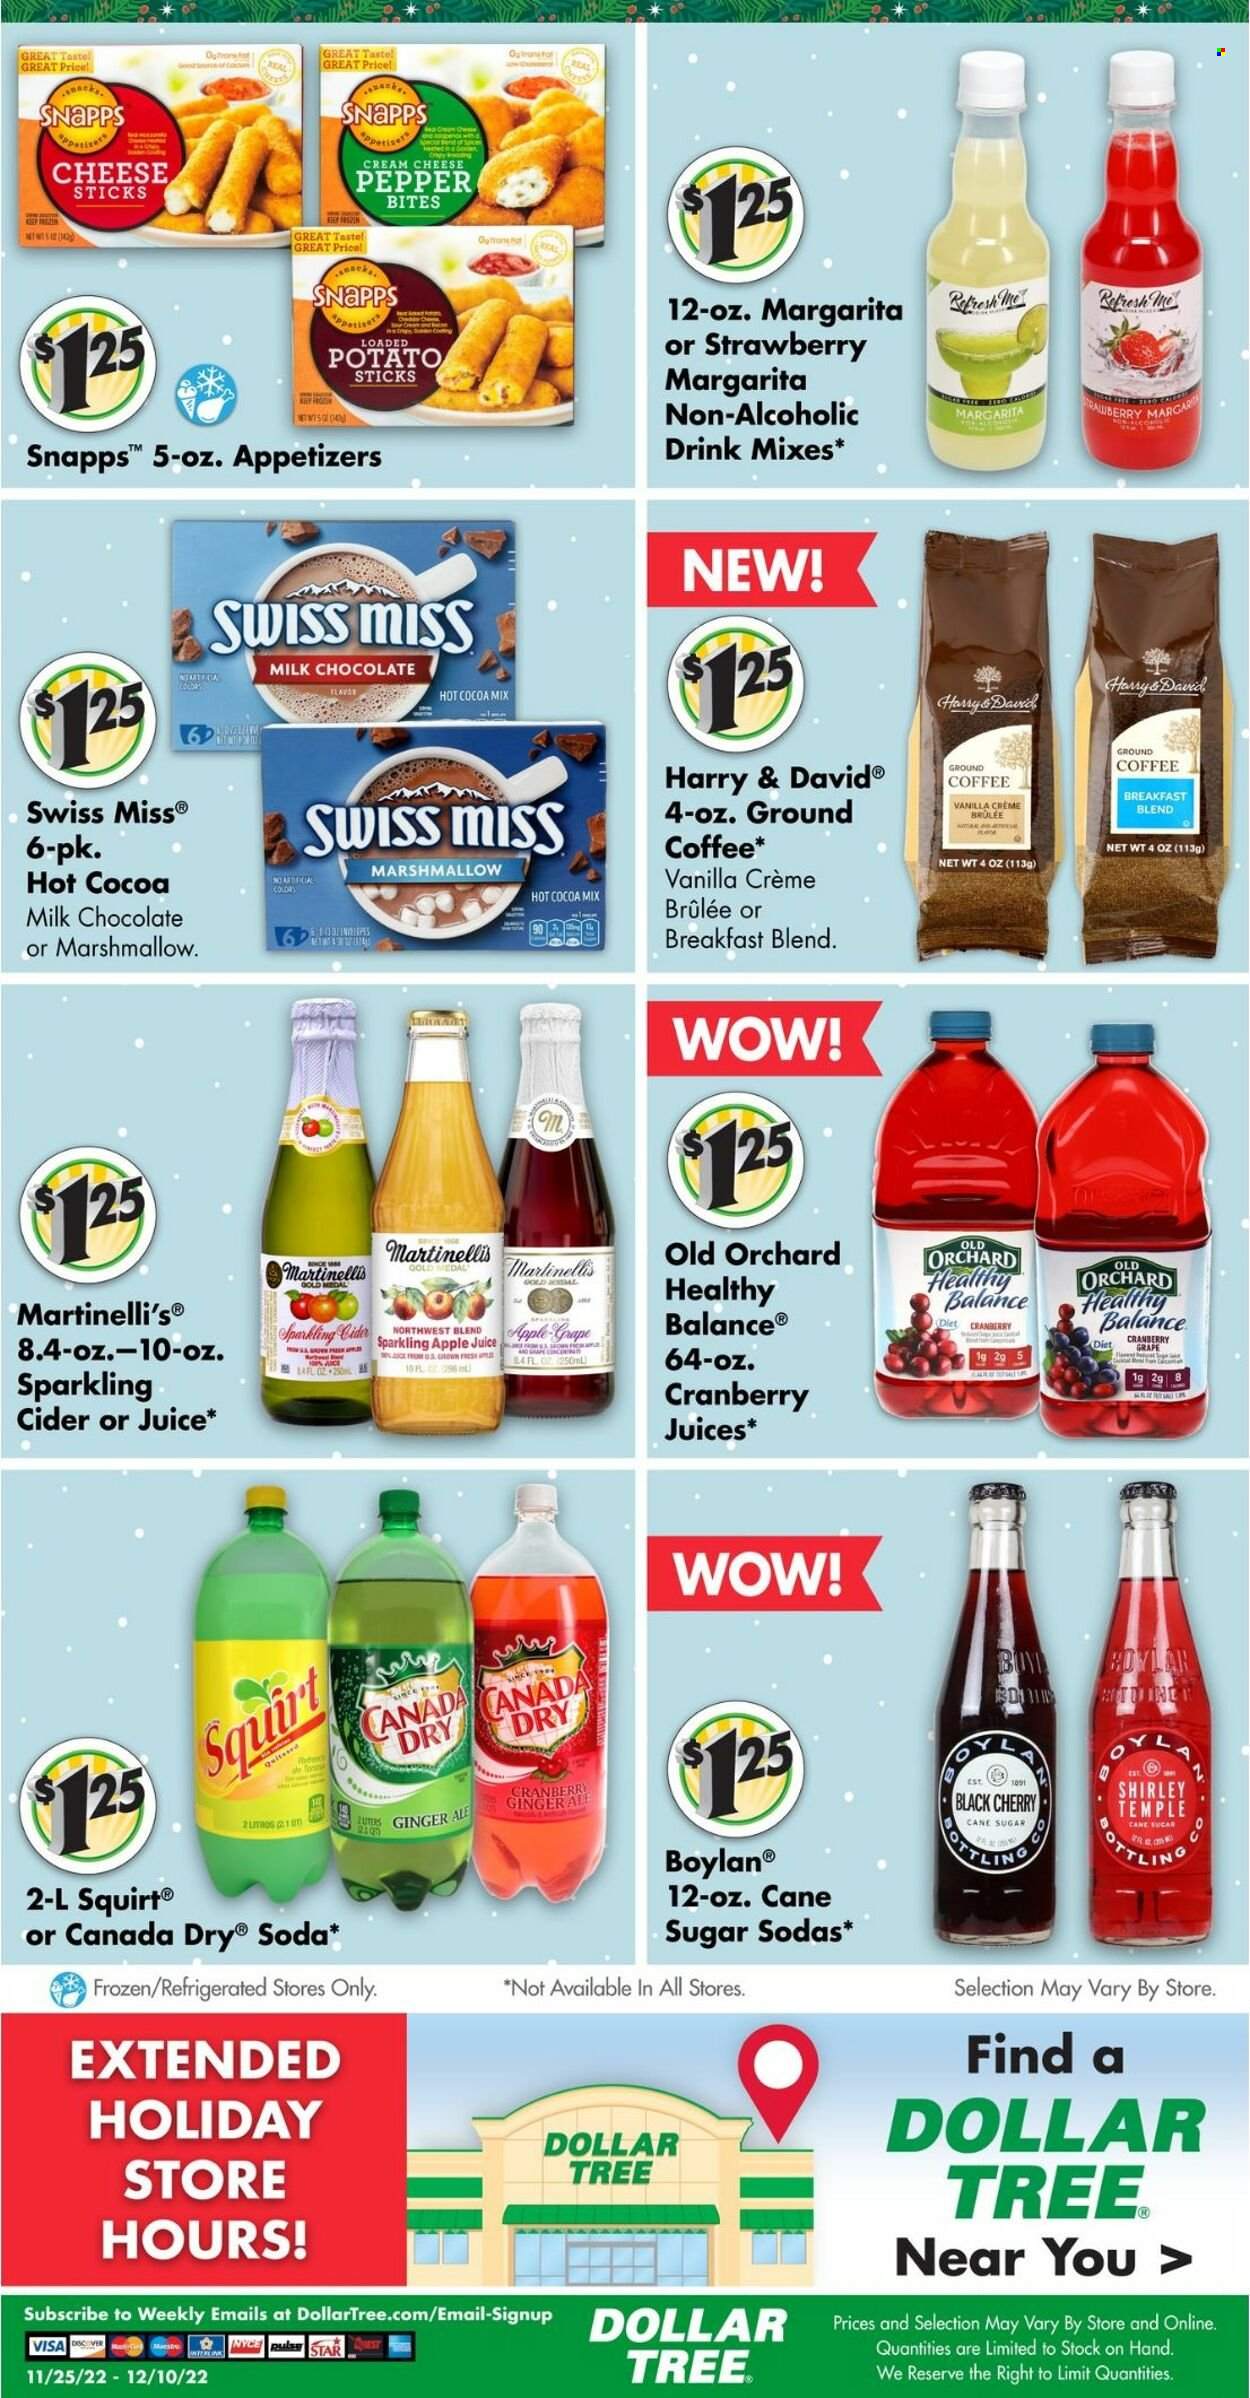 thumbnail - Dollar Tree Flyer - 11/25/2022 - 12/10/2022 - Sales products - cream cheese, cheese, Swiss Miss, cheese sticks, milk chocolate, chocolate, cane sugar, sugar, pepper, apple juice, Canada Dry, ginger ale, juice, soda, hot cocoa, coffee, ground coffee, breakfast blend, sparkling cider, sparkling wine, cider. Page 15.